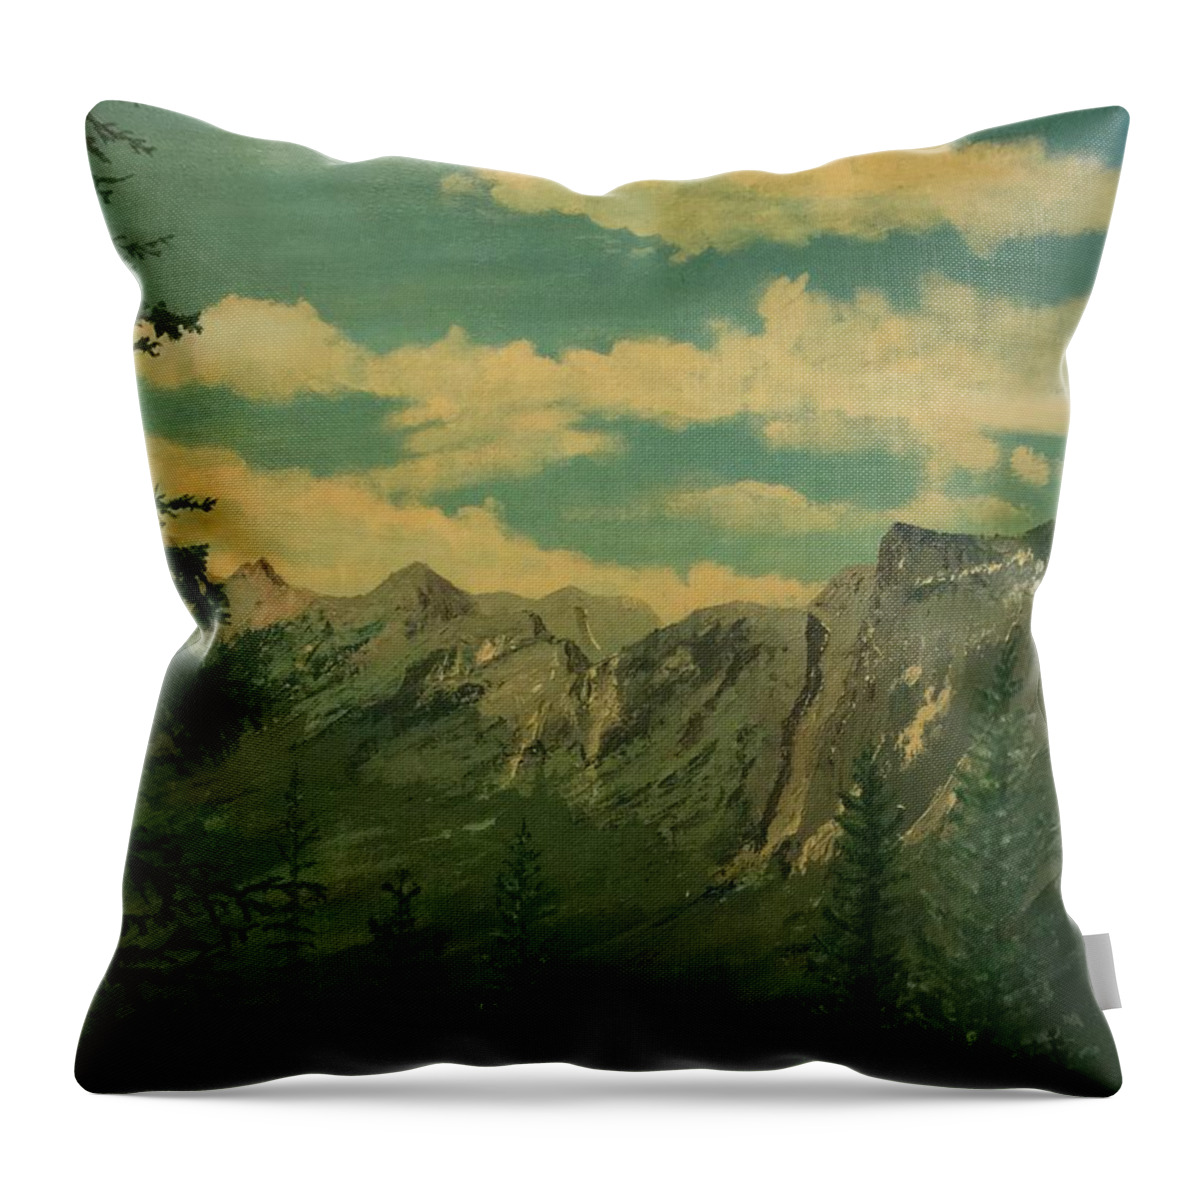 Banff Throw Pillow featuring the painting Banff by Terry Frederick